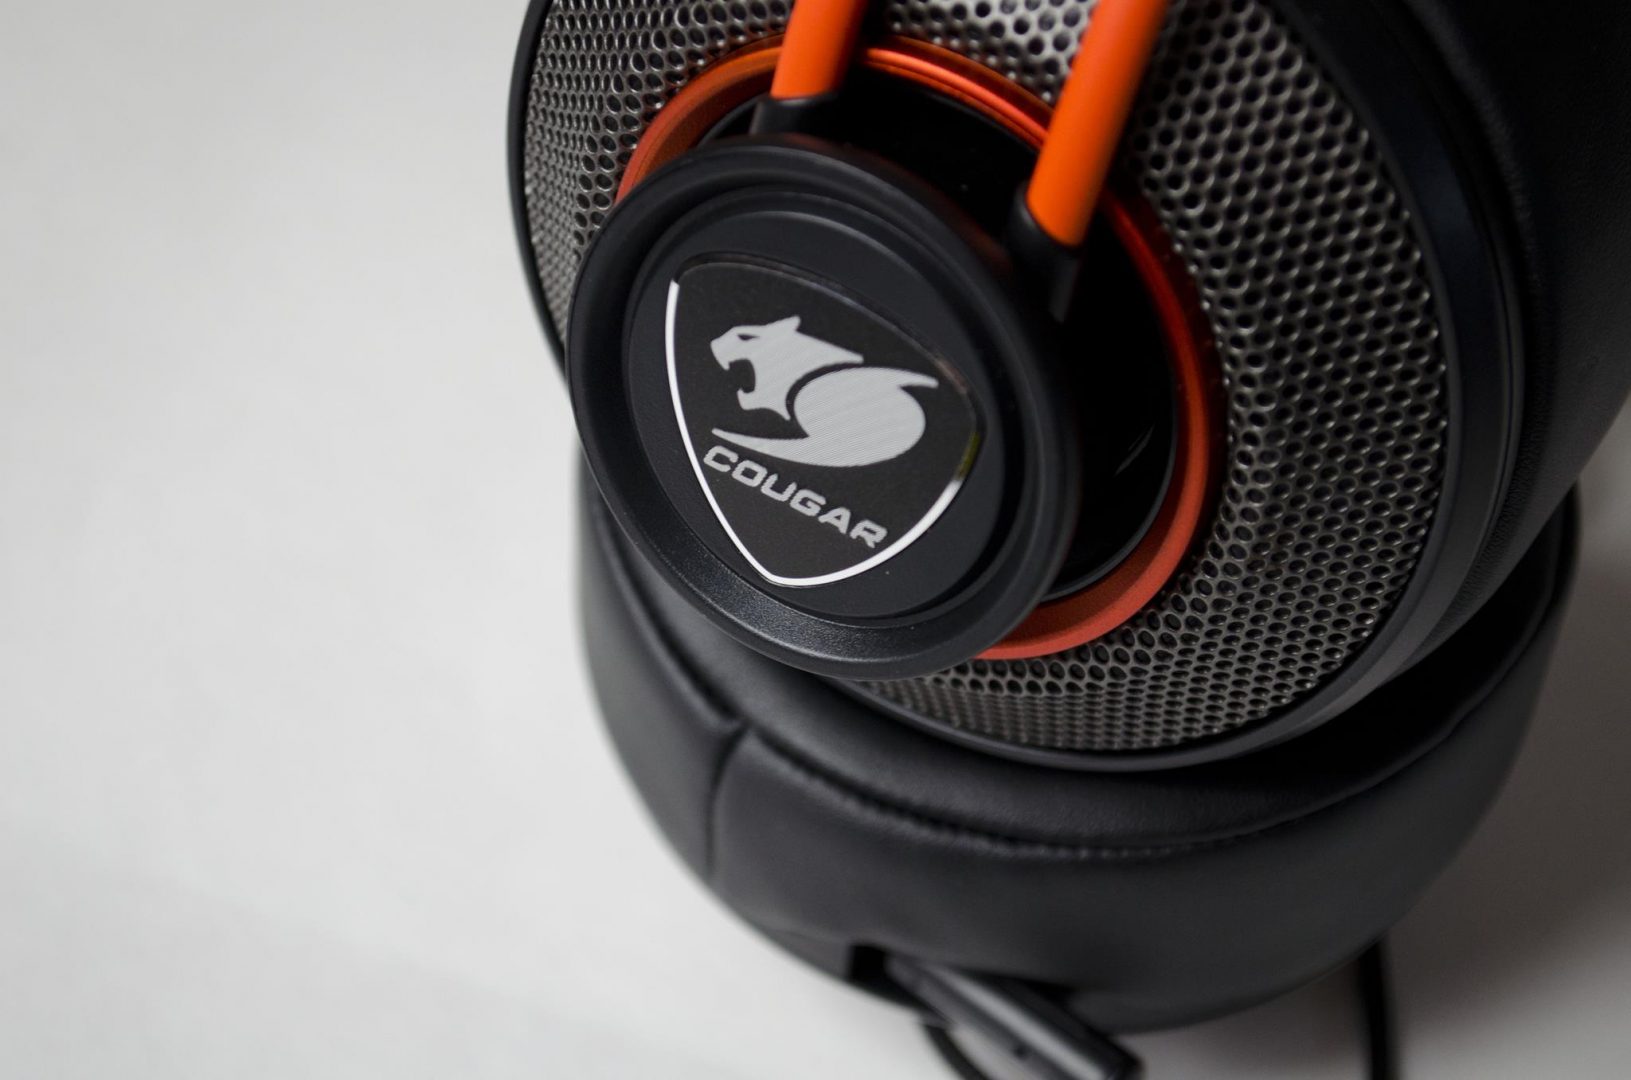 COUGAR IMMERSA Headset Review